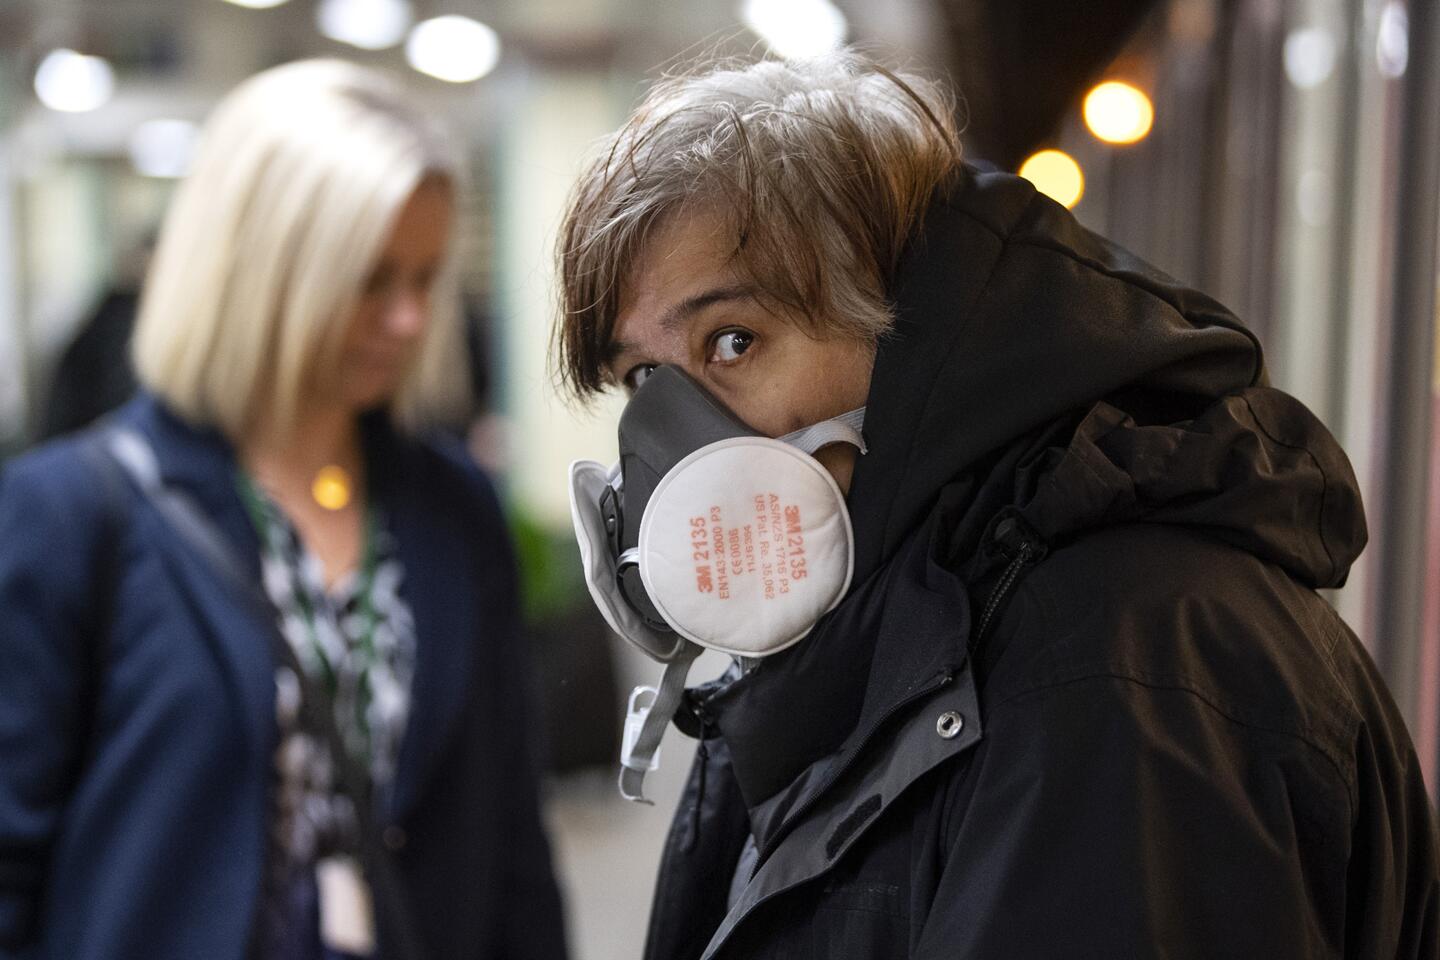 Britain: A commuter wearing a face protection mask travels on the Underground tubes.